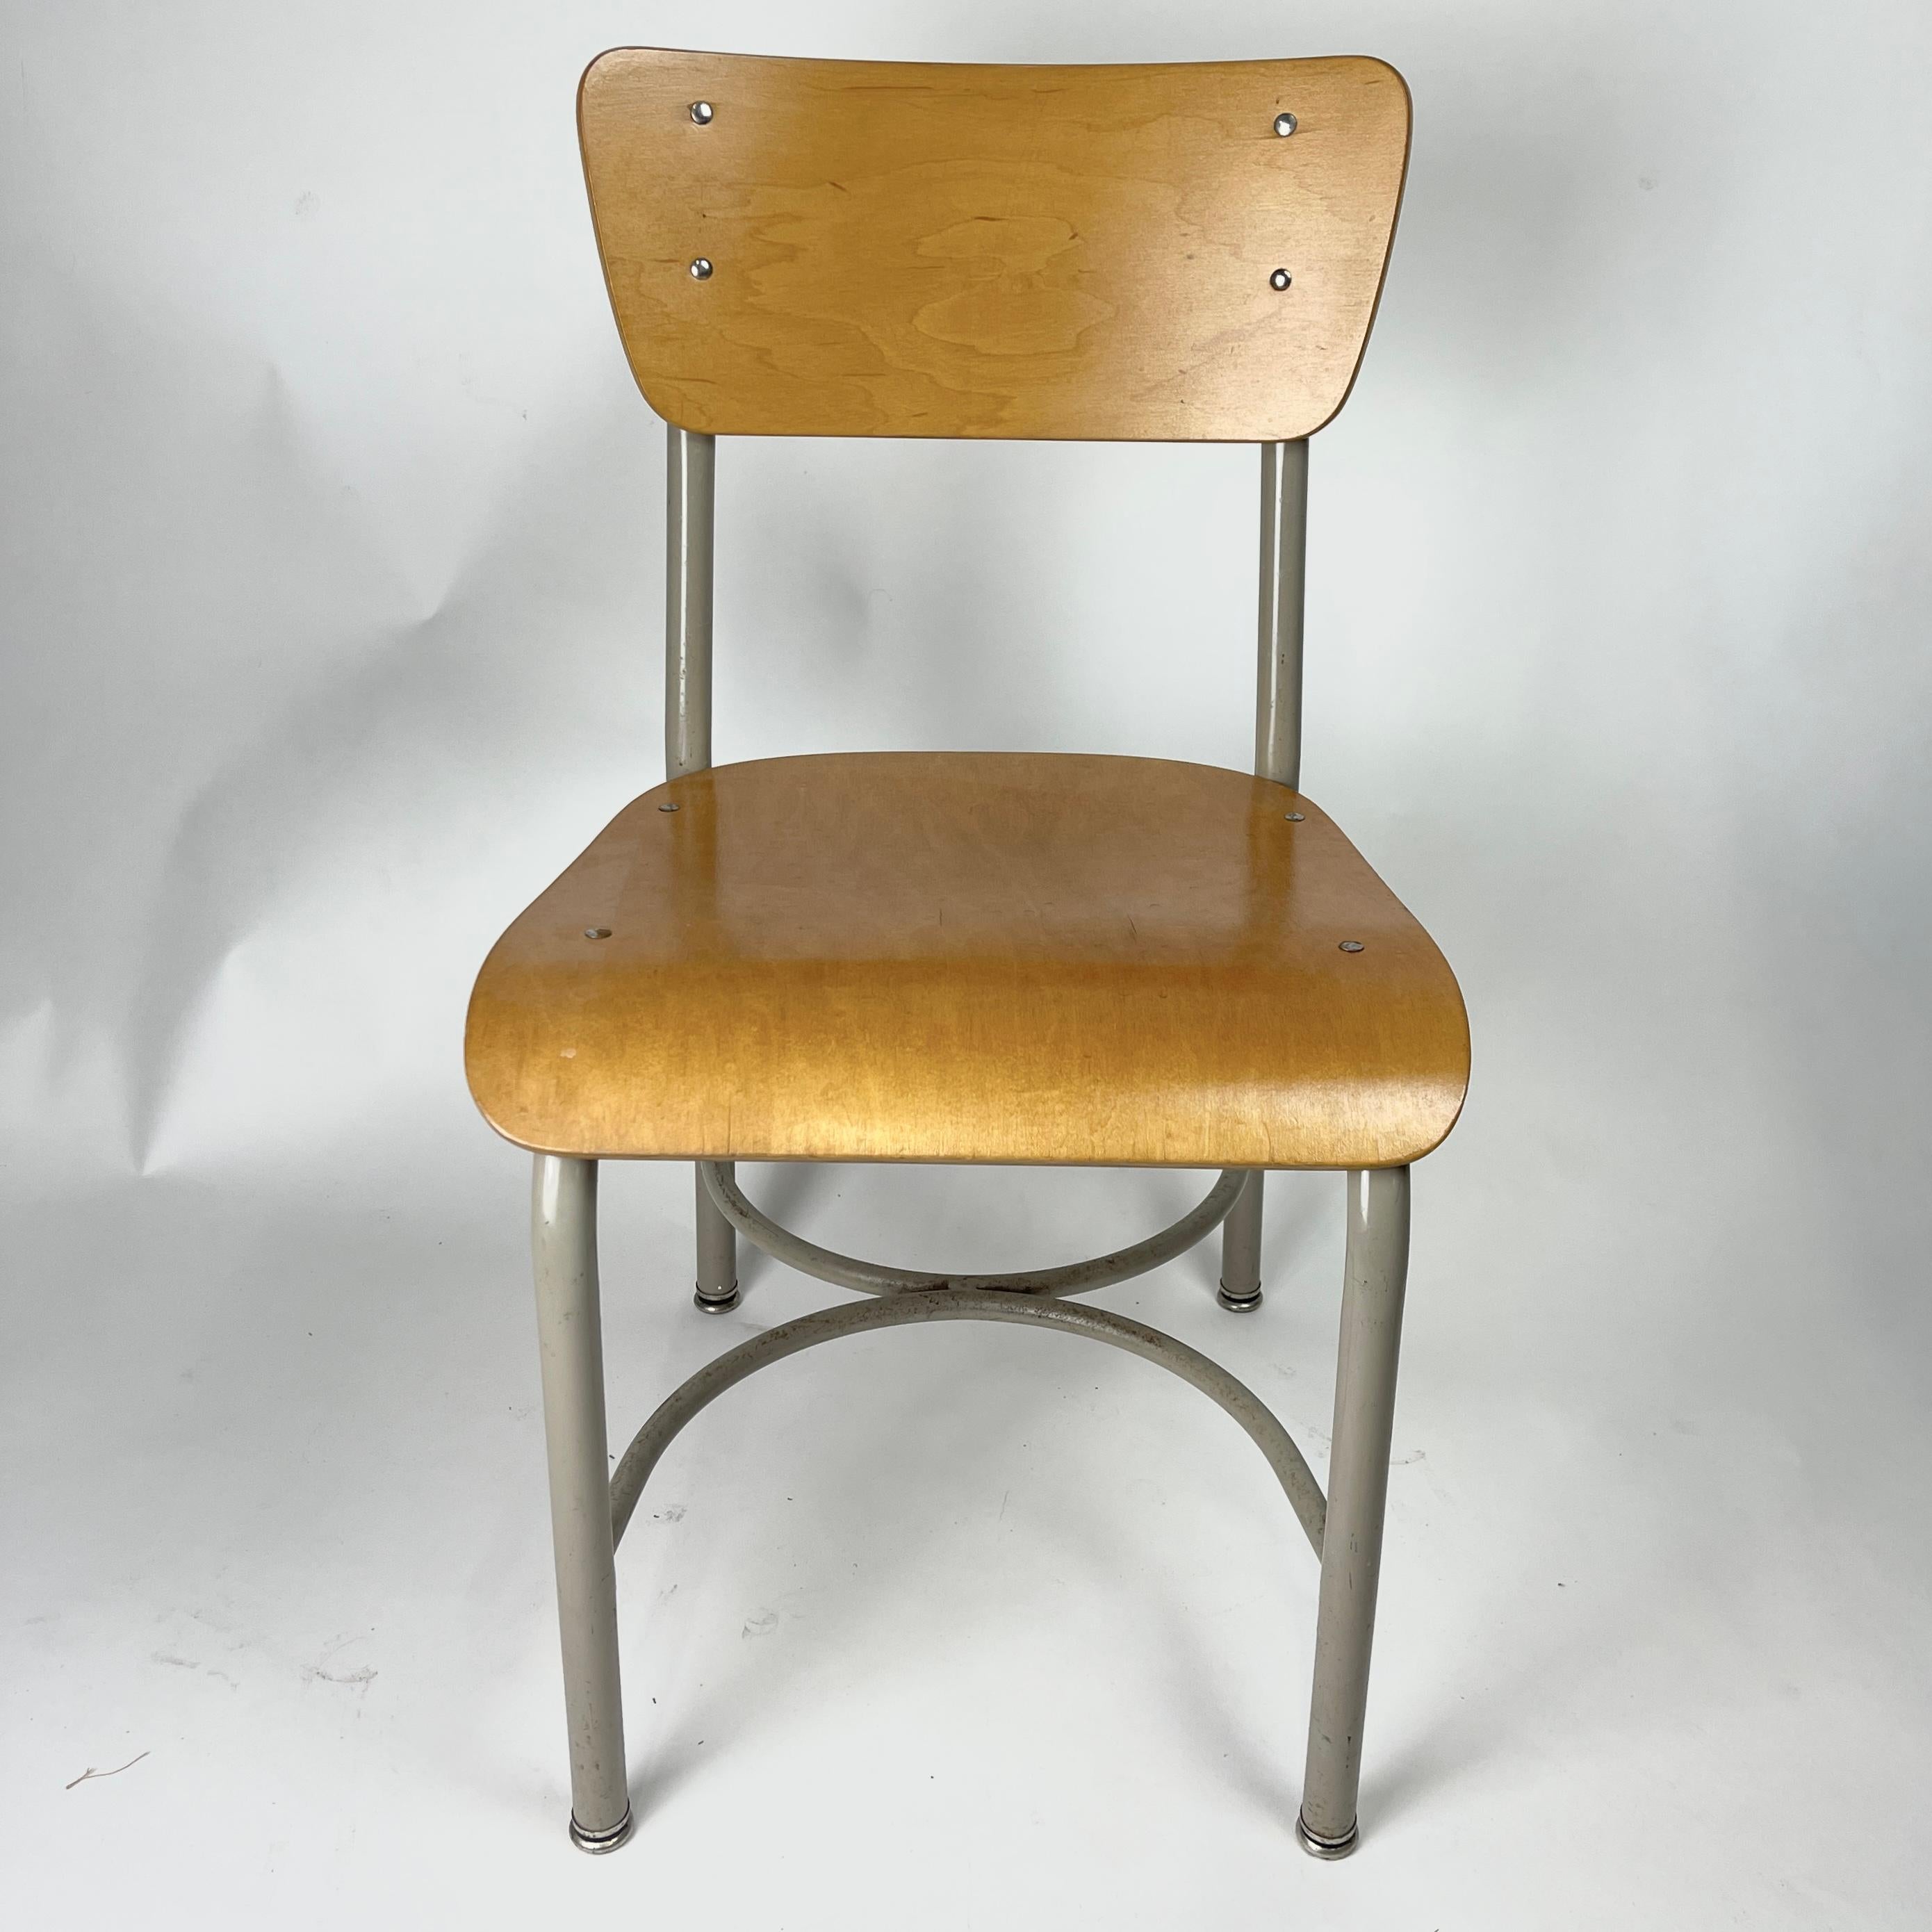 40 available. Elegant grey framed school chairs with bent birch plywood seats and backs. These are vintage midcentury school chairs that would look great in a rustic or more contemporary kitchen or casual dining area. These are perfect for a cafe or